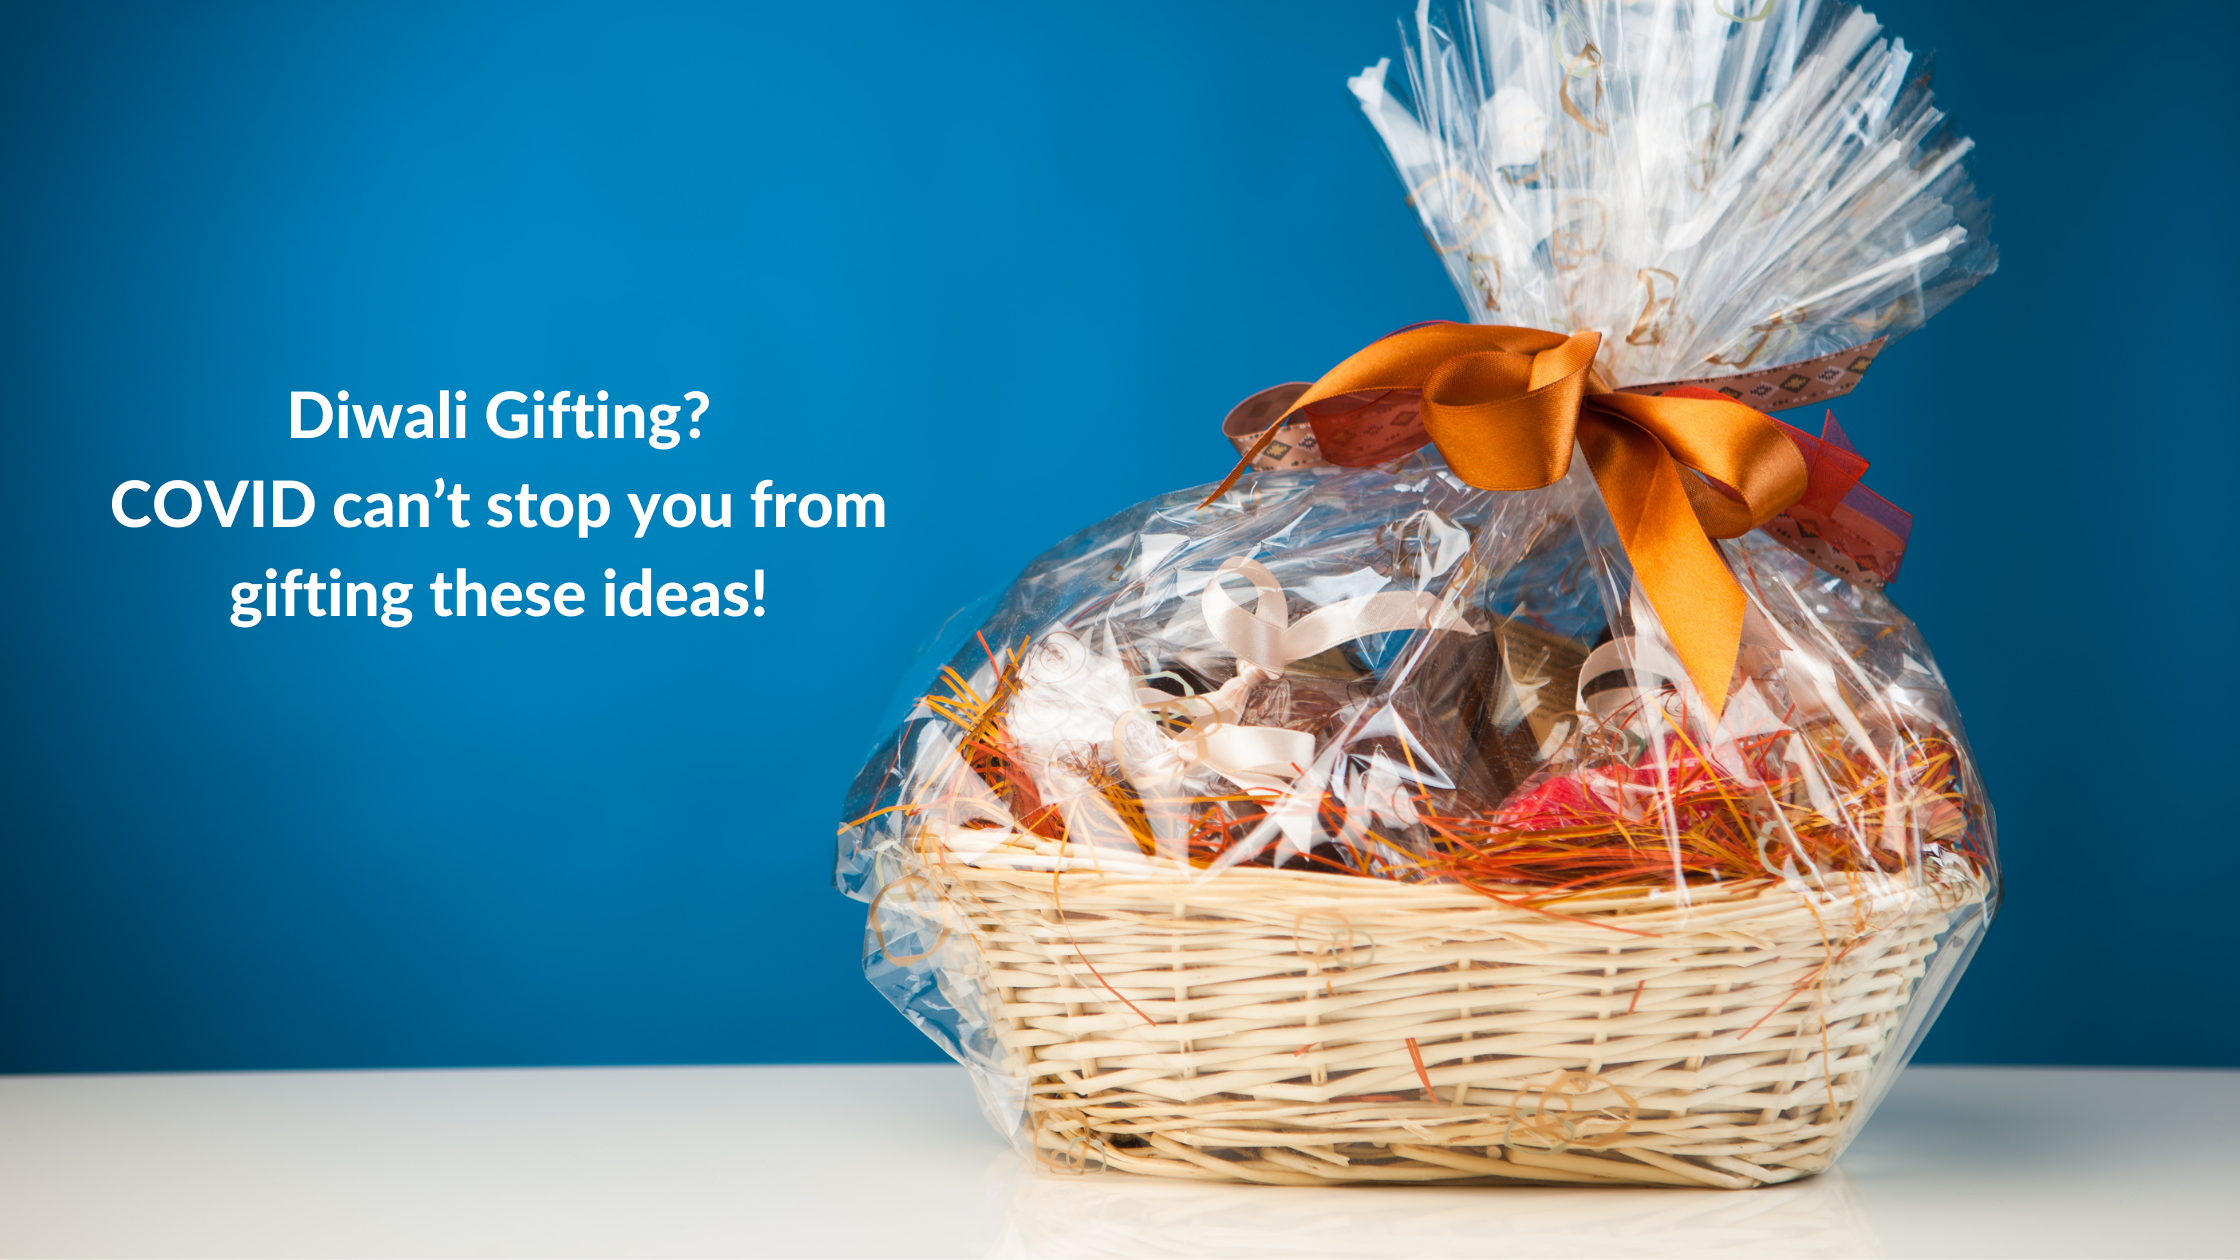 Diwali Gifting? COVID can’t stop you from gifting these ideas!